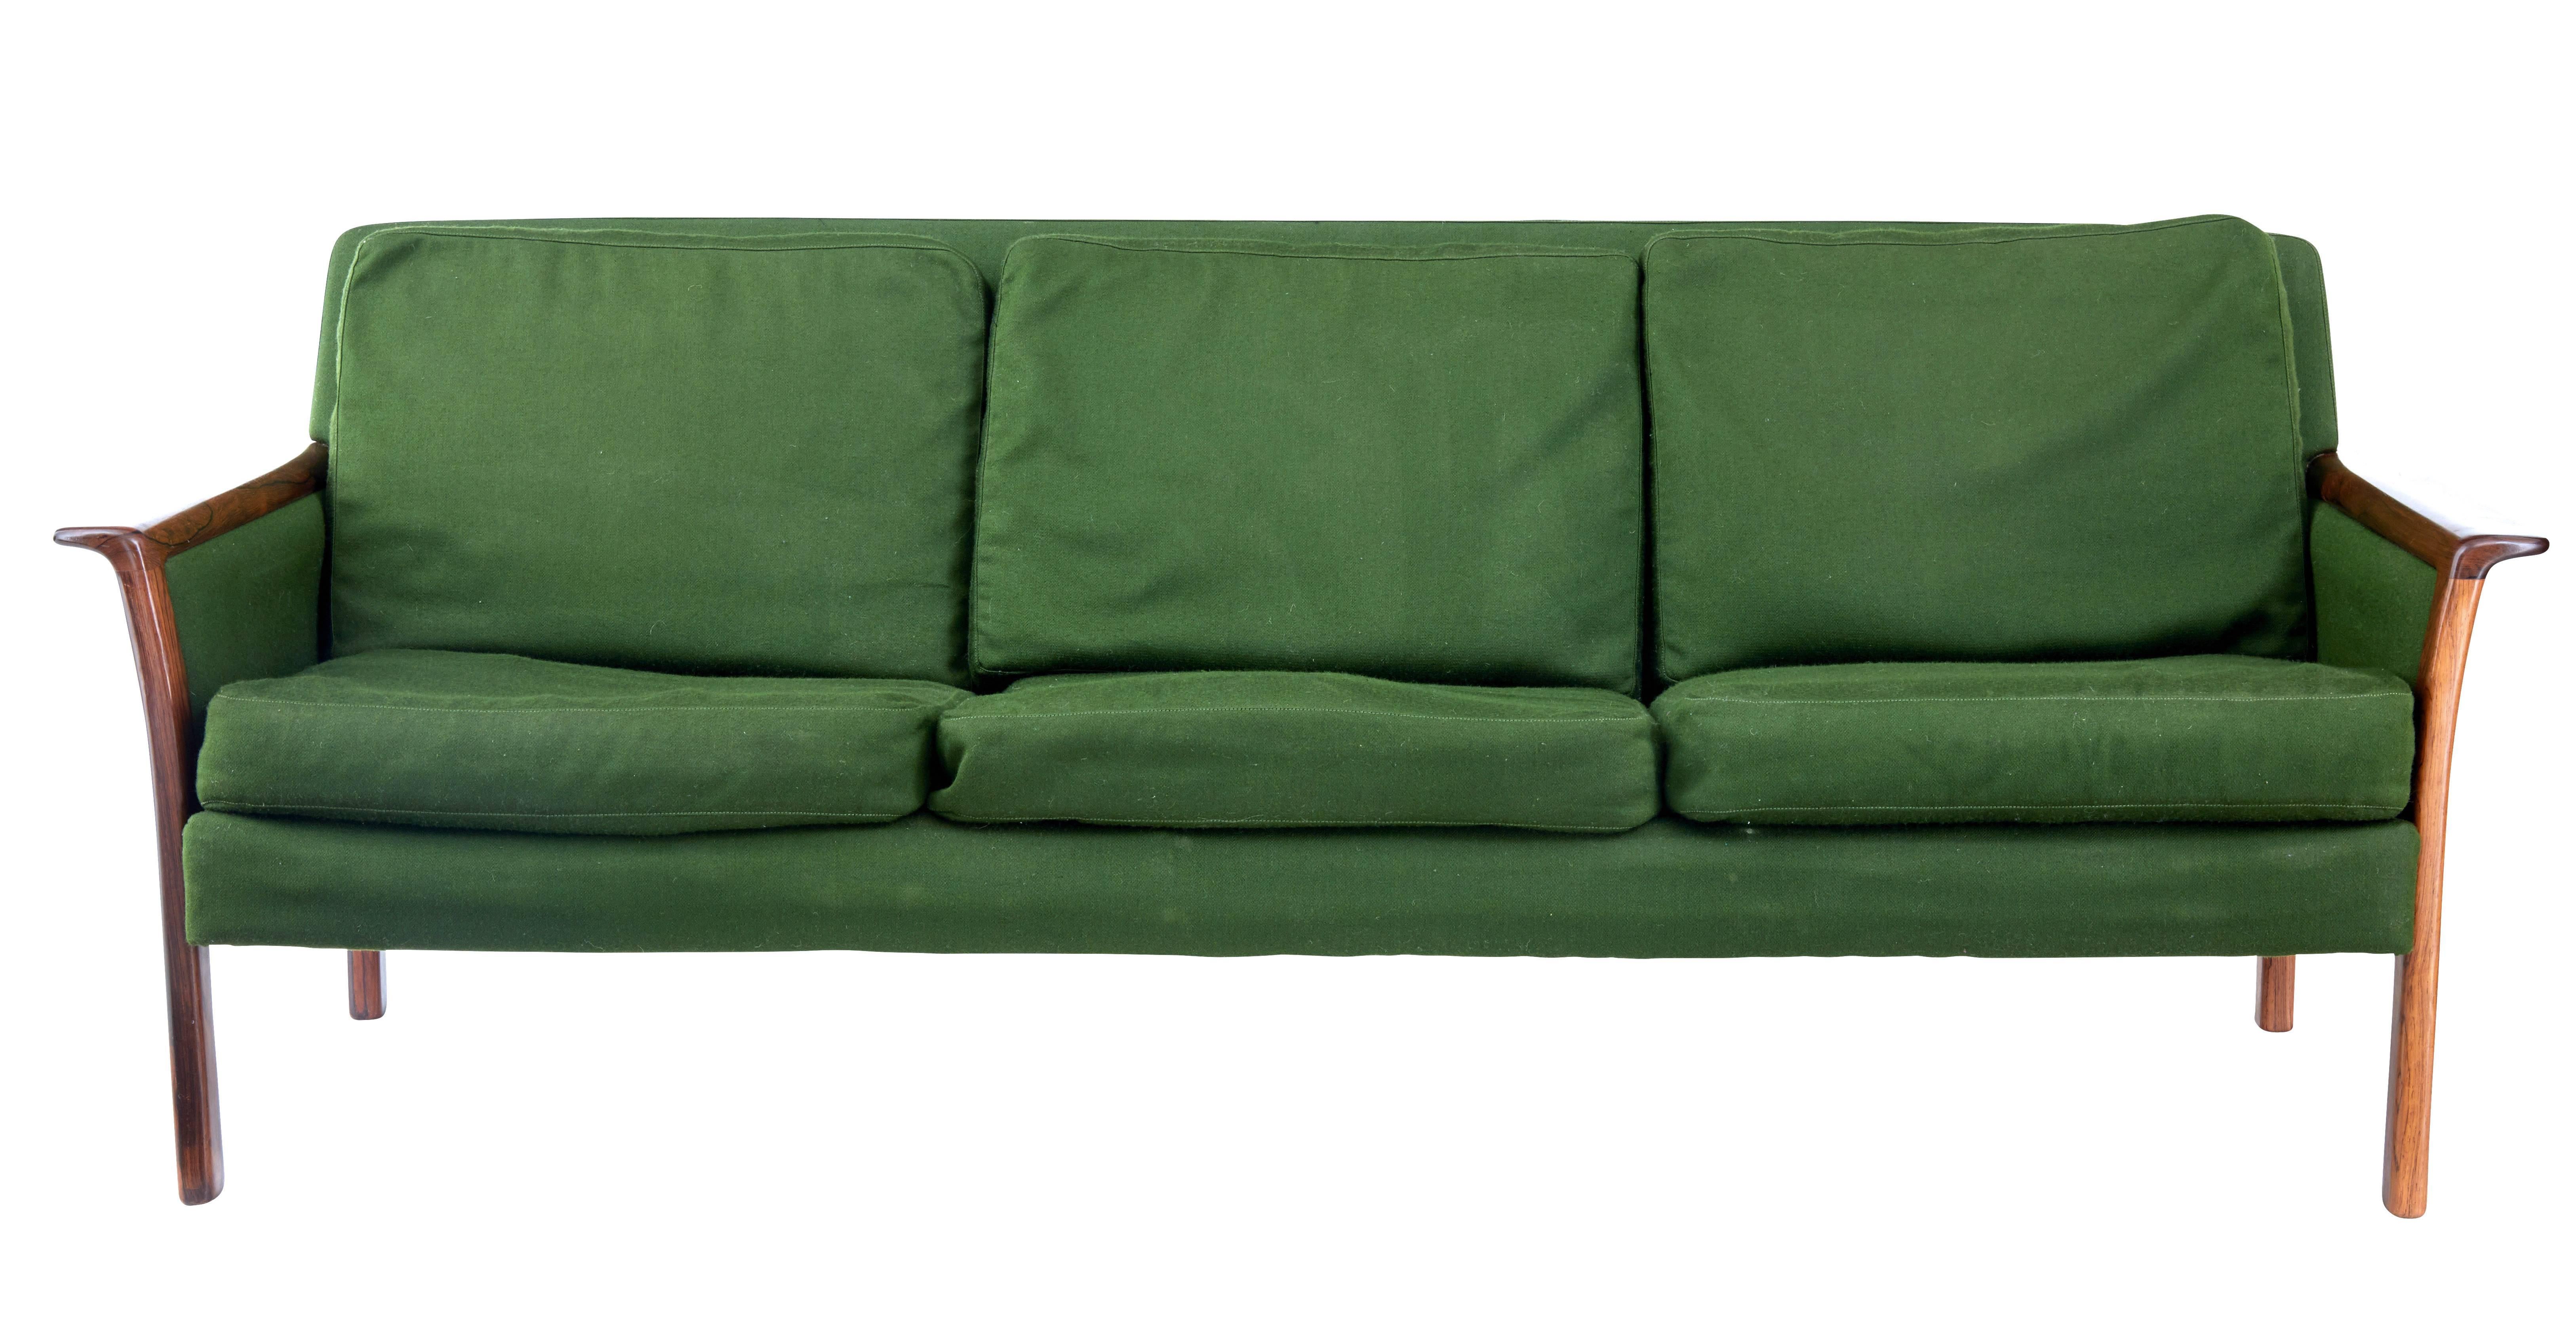 Stylish Swedish rosewood sofa by Andersson, circa 1960.

Beautiful rosewood show frame sofa, with good quality rosewood used.

Upholstered in deep green cotton.

Measures: Seat height: 16